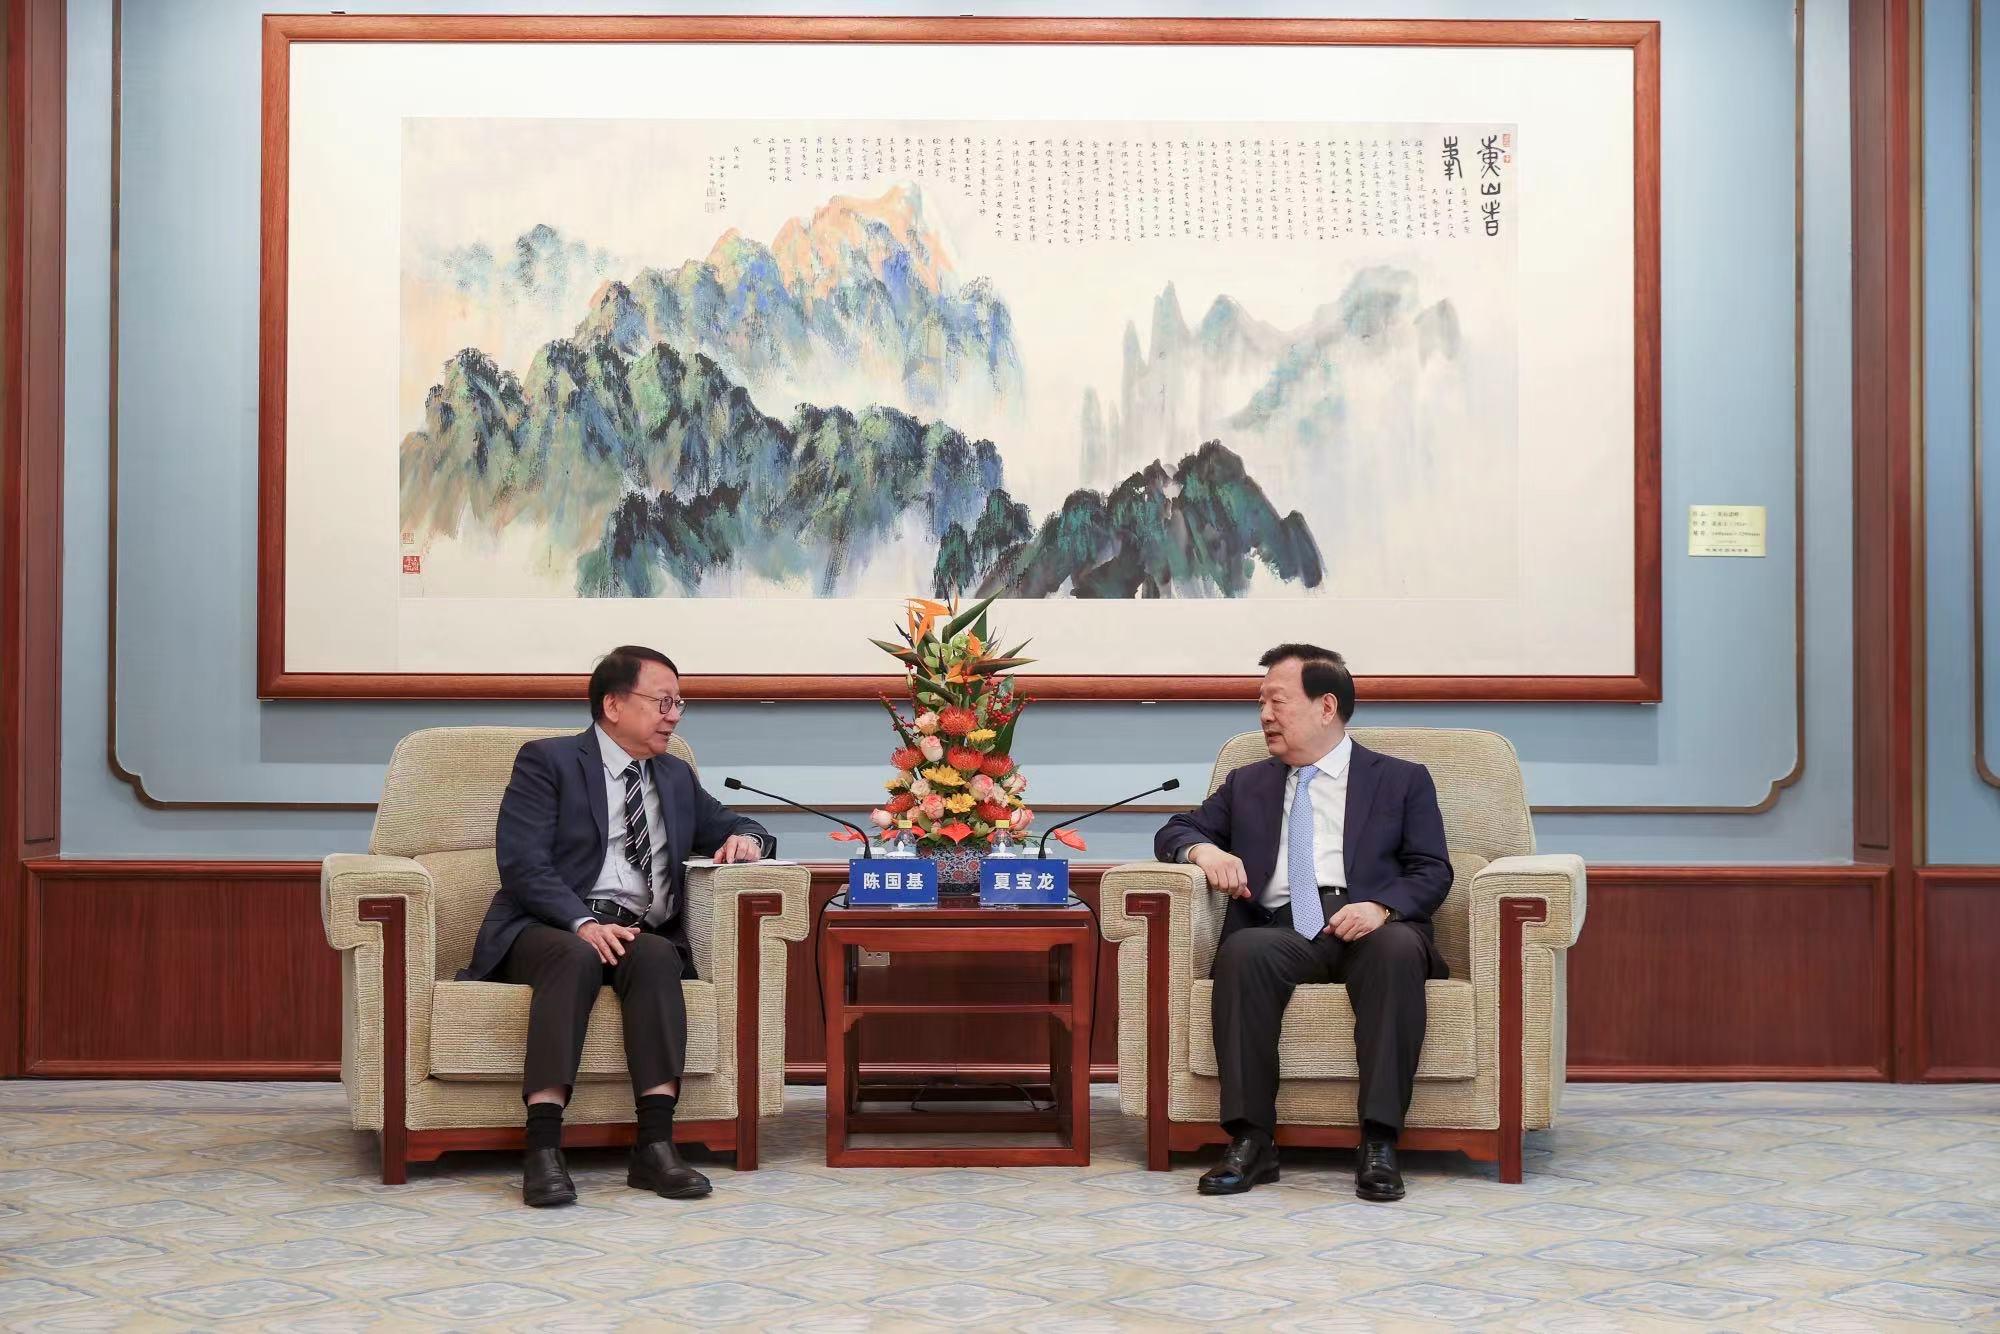 The Chief Secretary for Administration, Mr Chan Kwok-ki (left), calls on the Director of the Hong Kong and Macao Affairs Office of the State Council, Mr Xia Baolong (right), in Beijing today (April 28).